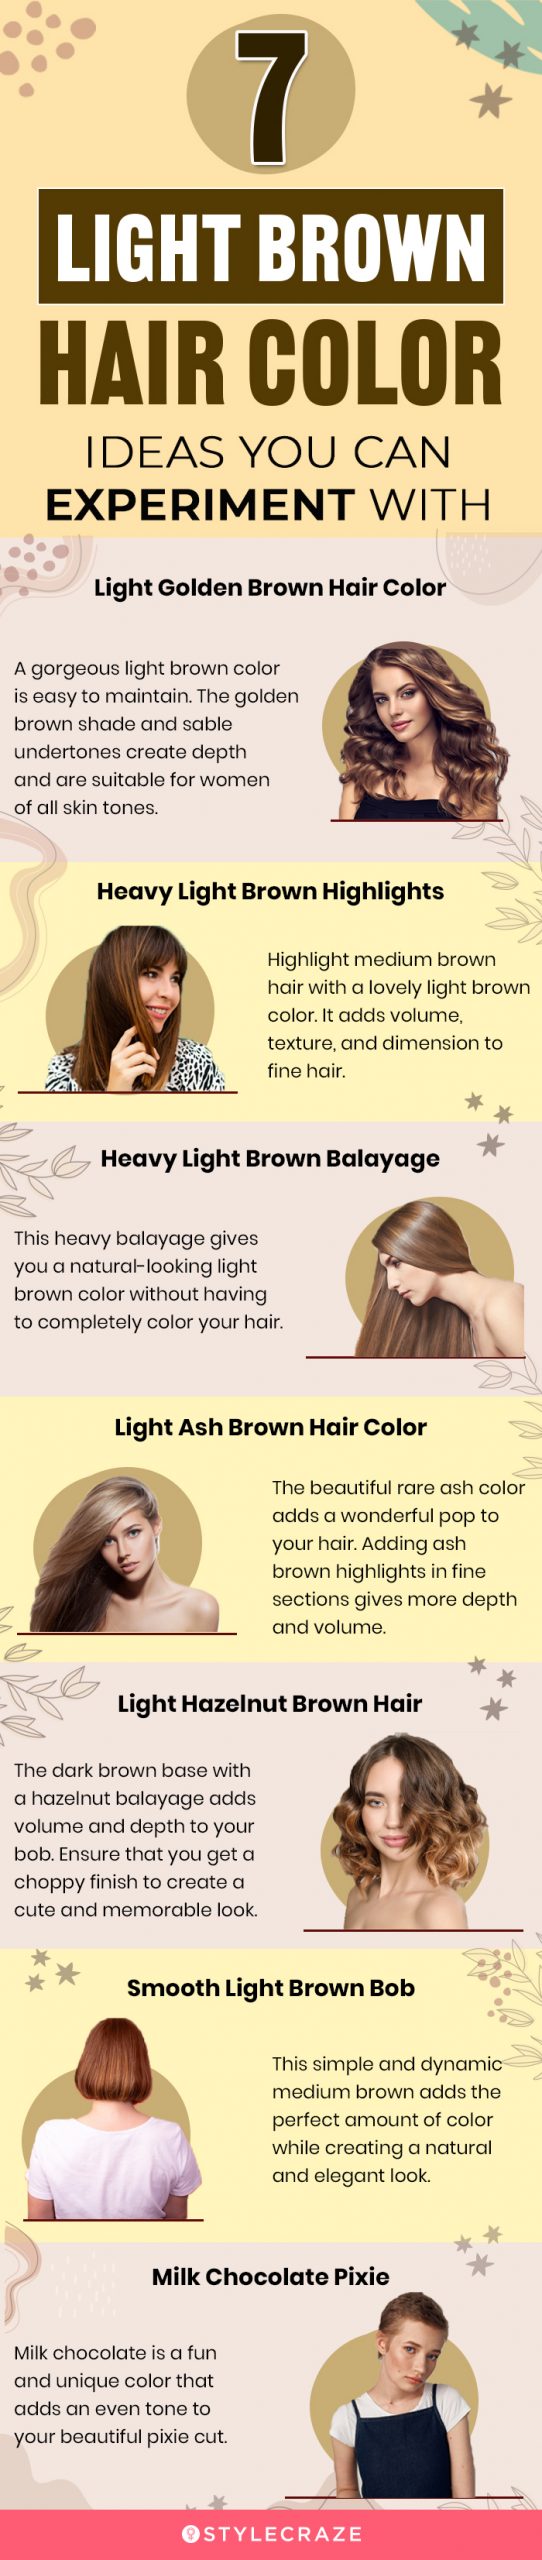 7 light brown hair color ideas you can experiment with [infographic]